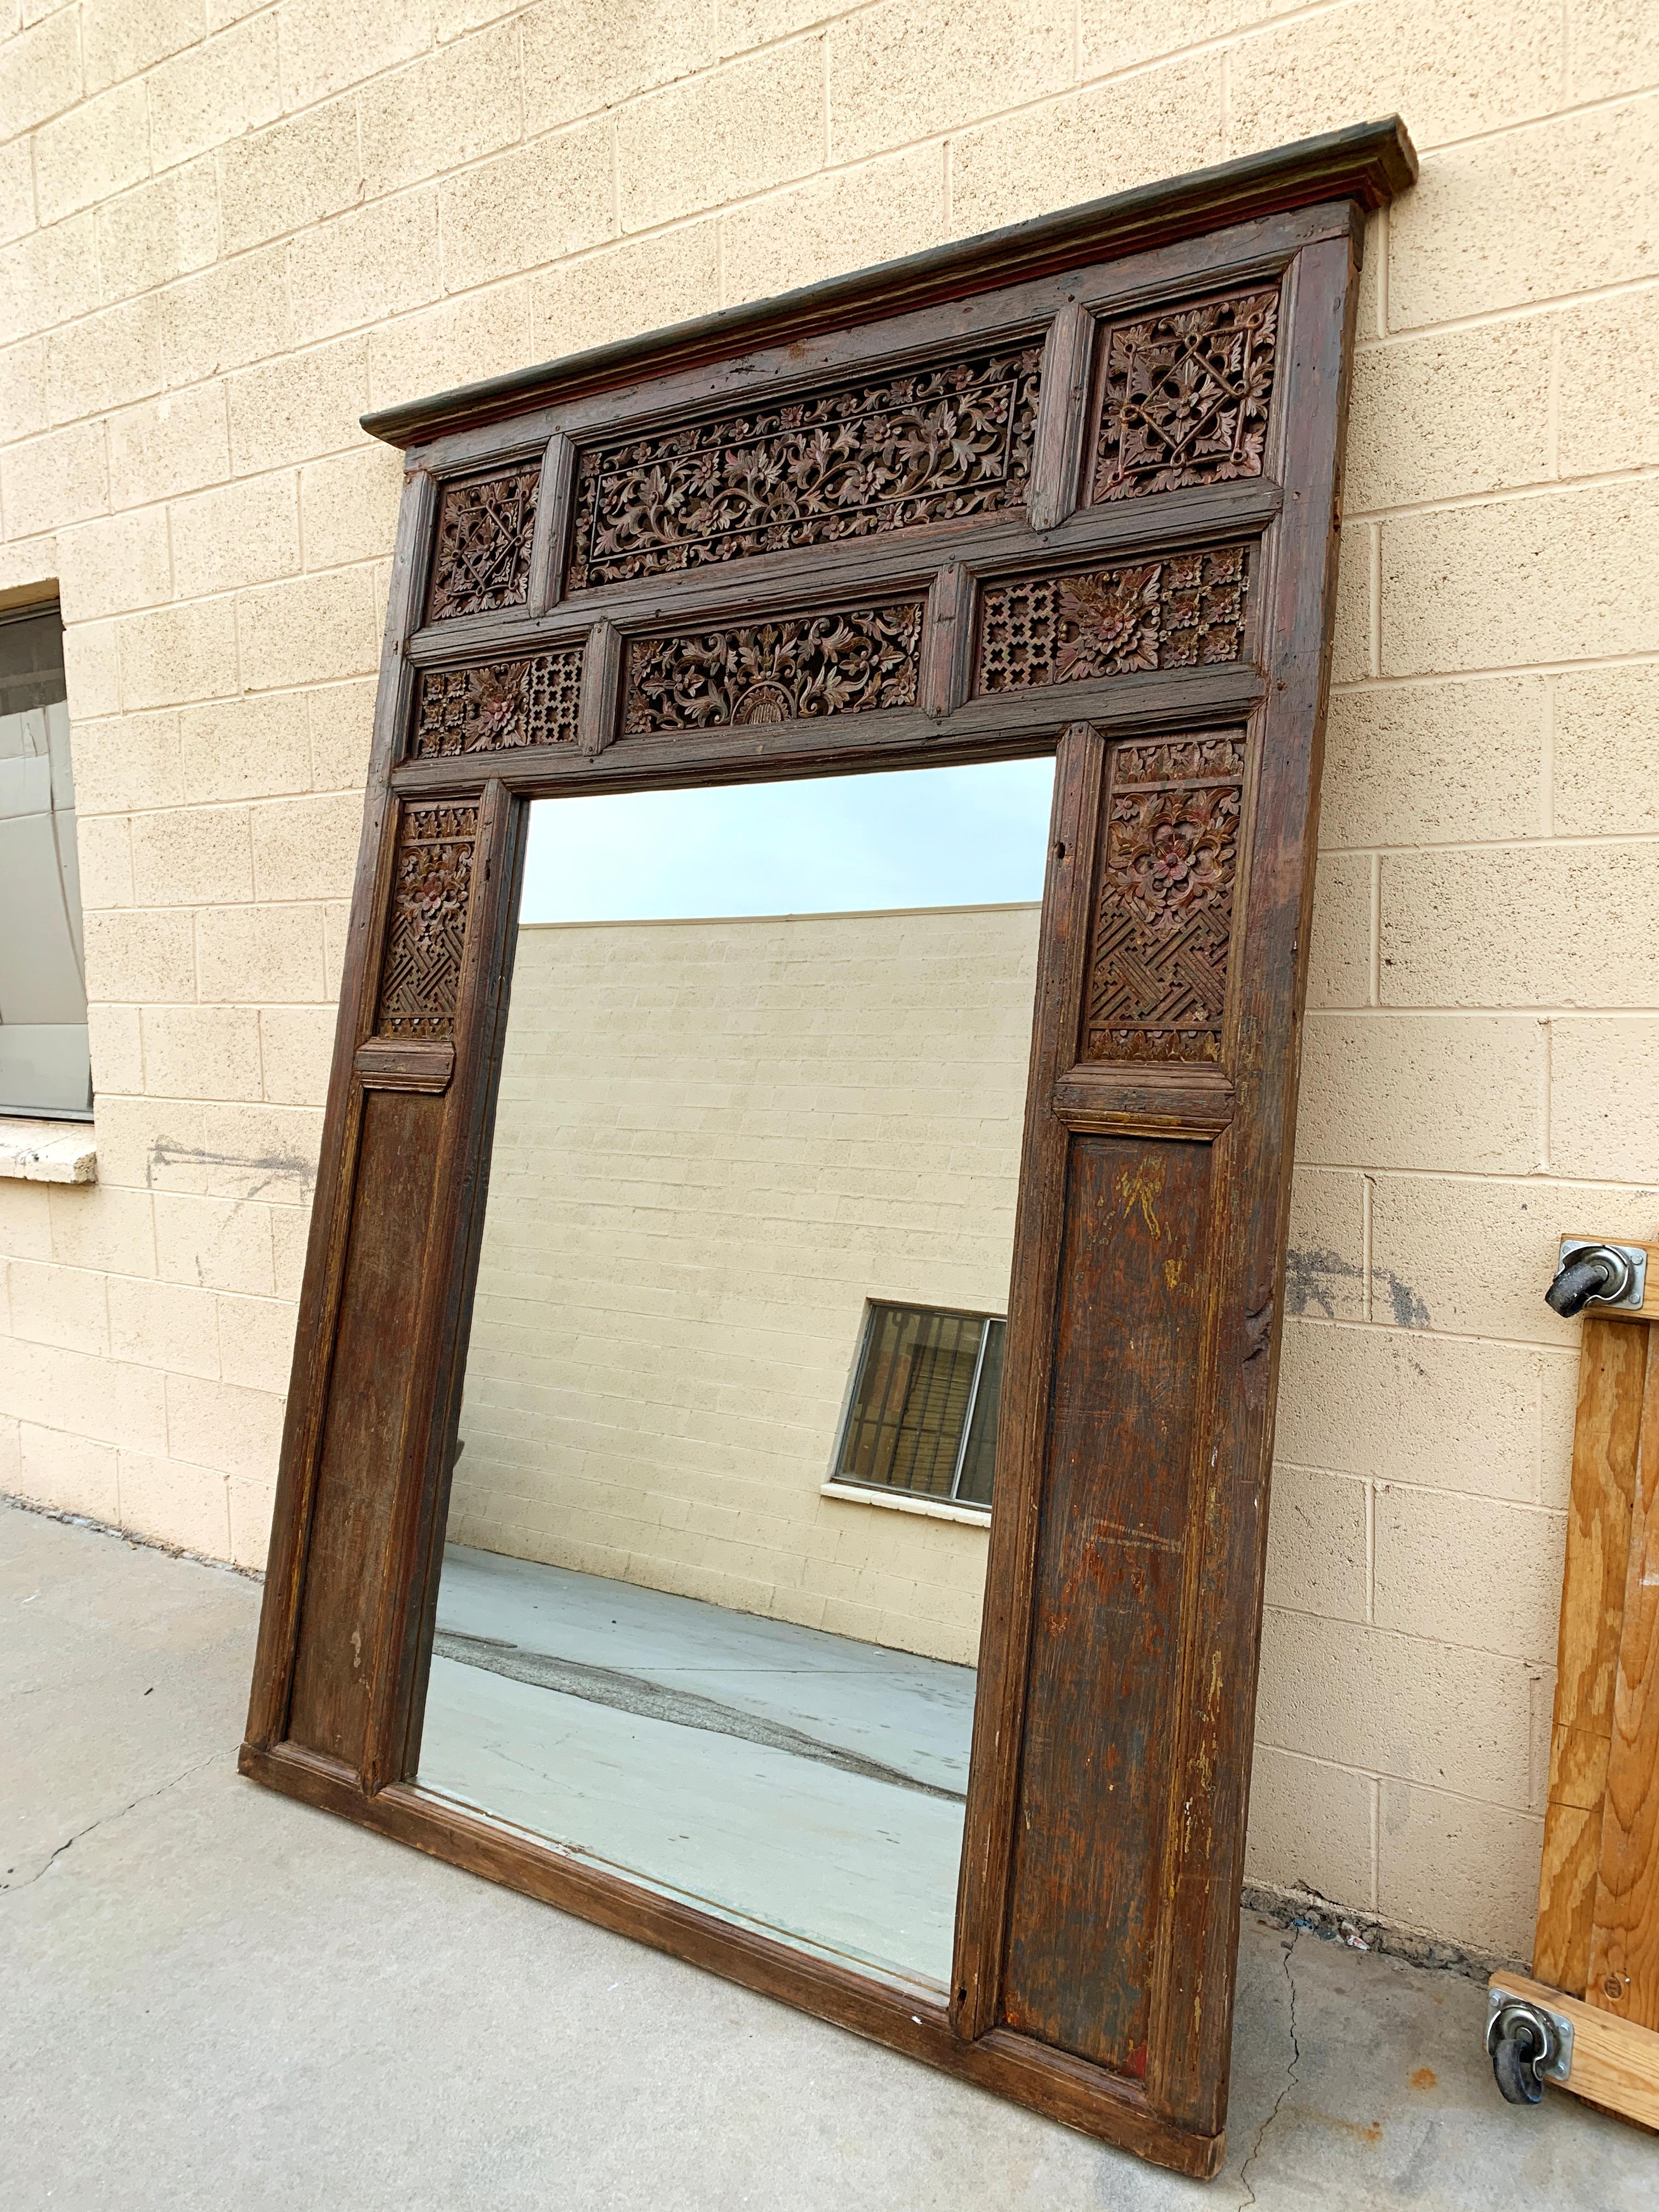 This impressive mirror was repurposed from an old window frame from the Rajasthan region of India. The teak wood features a beautiful carved floral motif. Unique patina shows wonderful variations in color. One-of-a-kind. 

Dimensions: 92